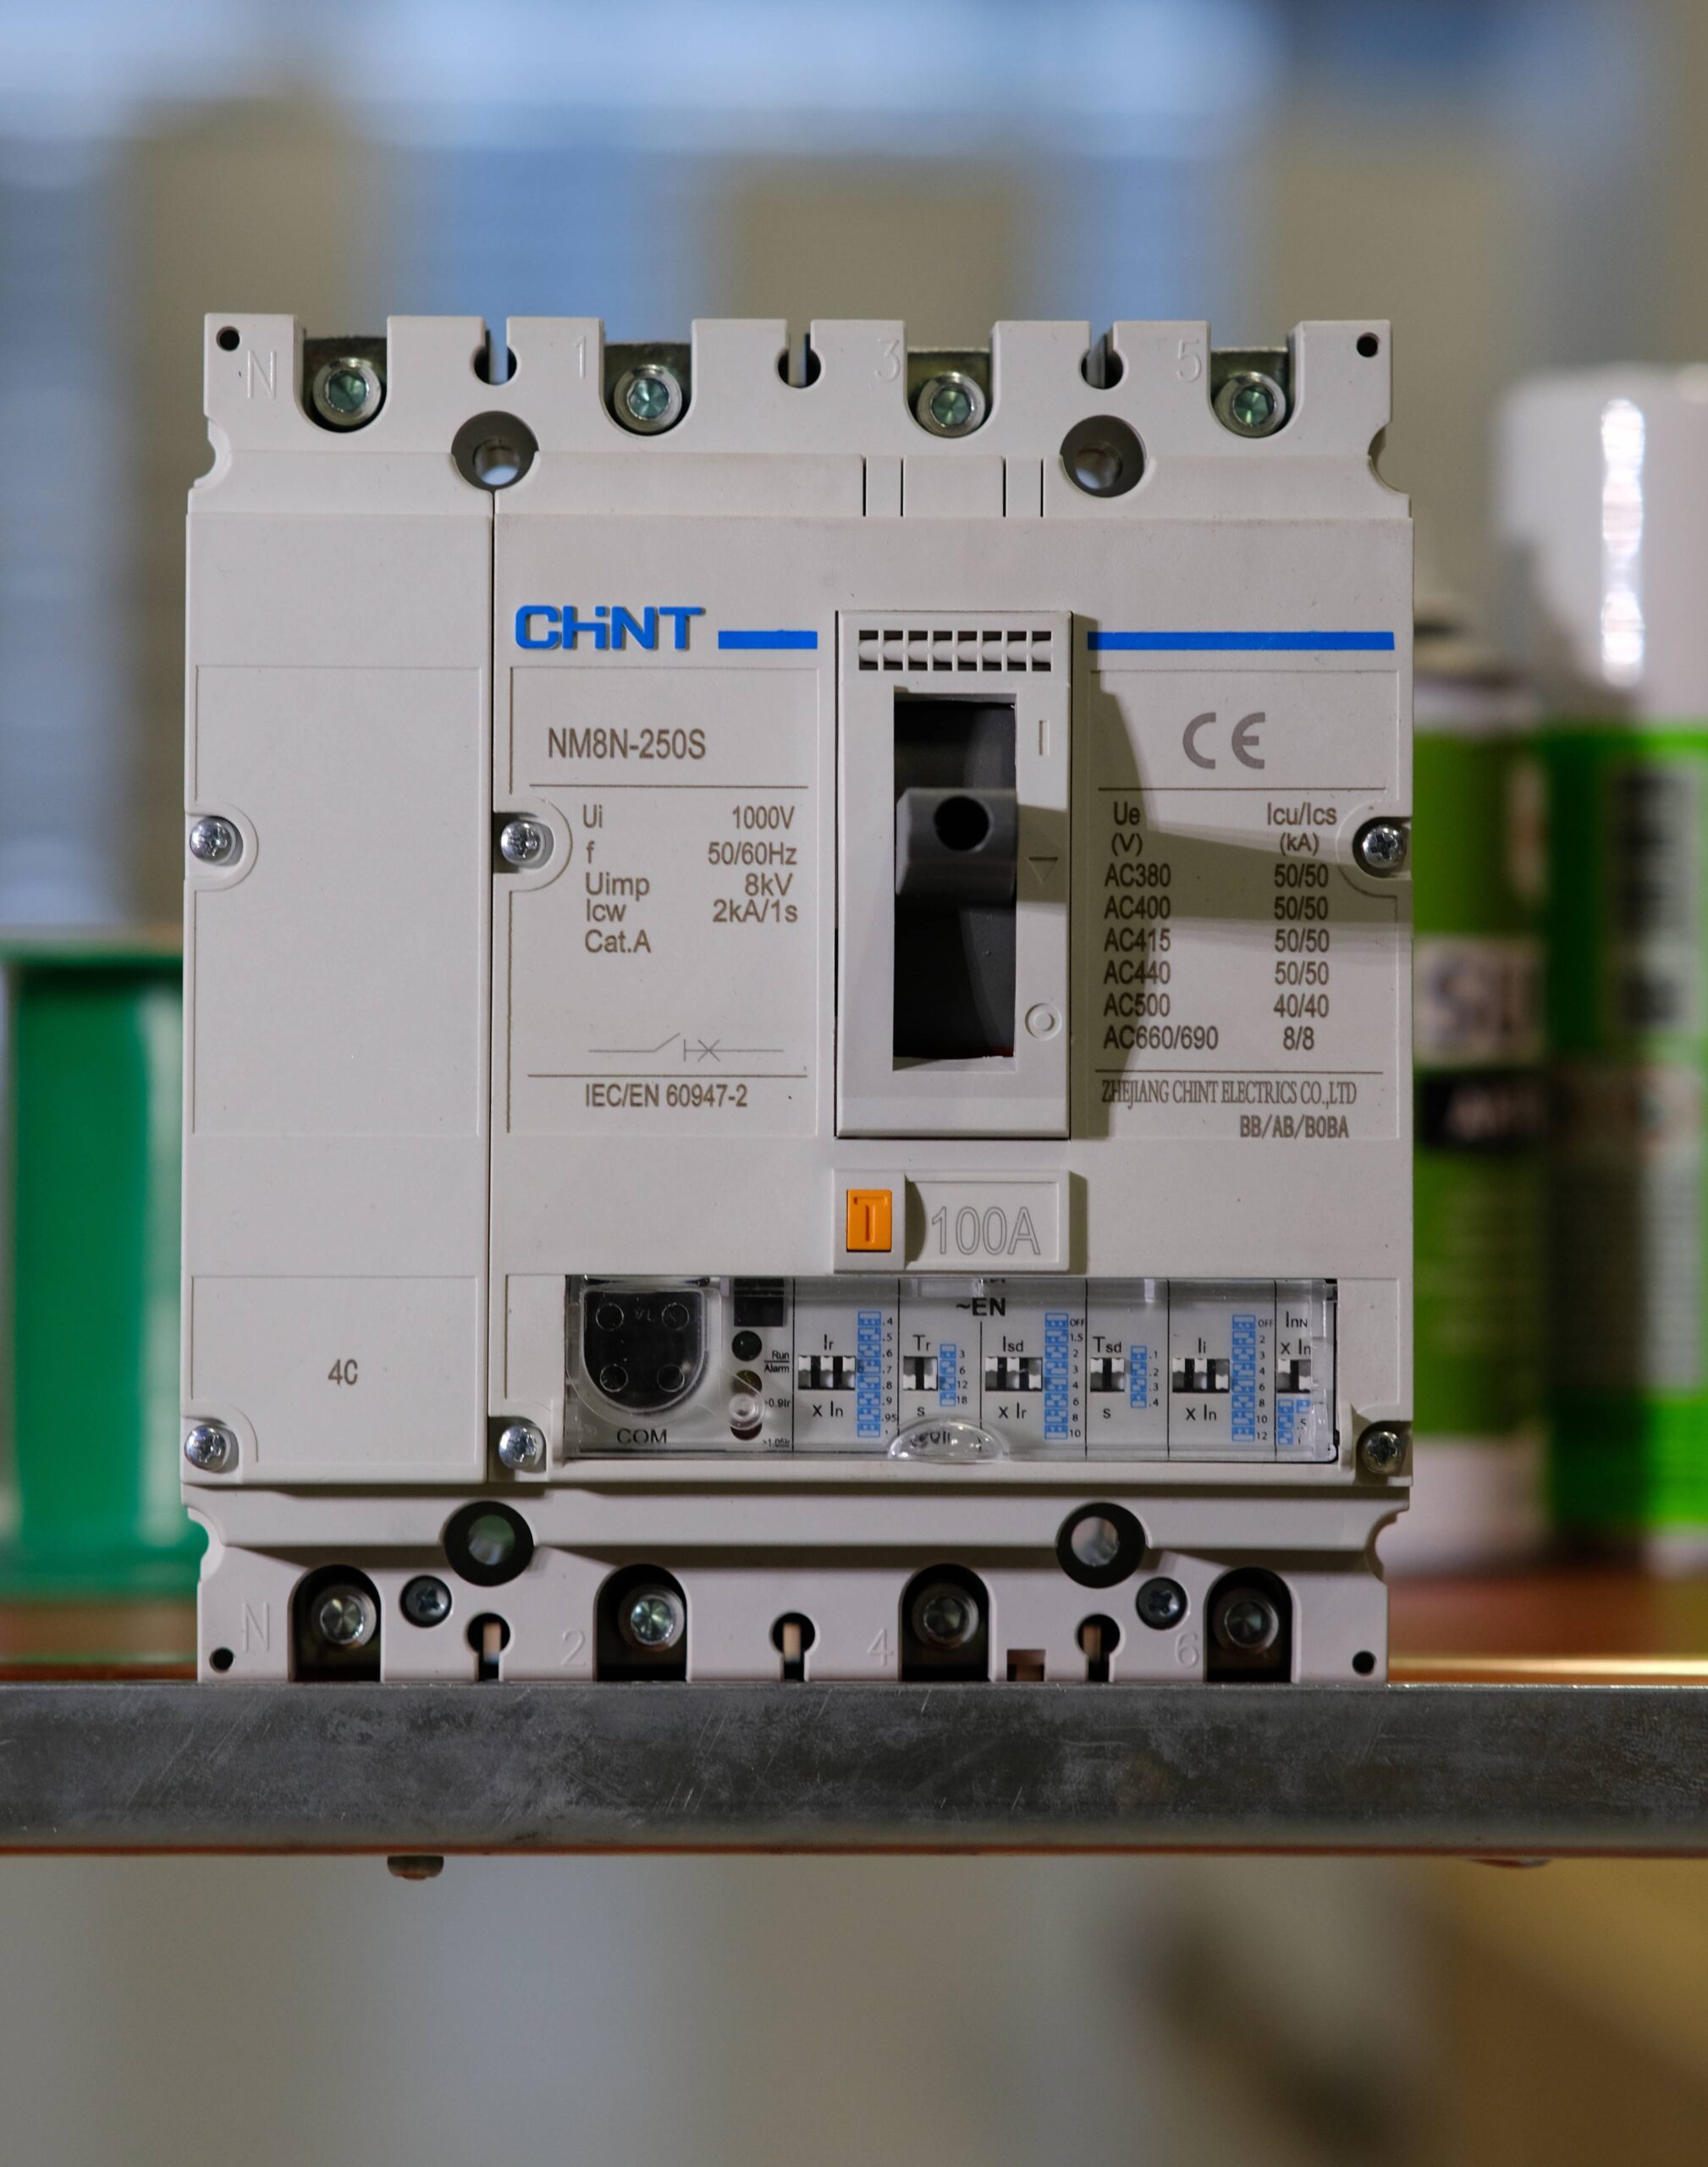 photograph of a chint circuit breaker with blurry background.